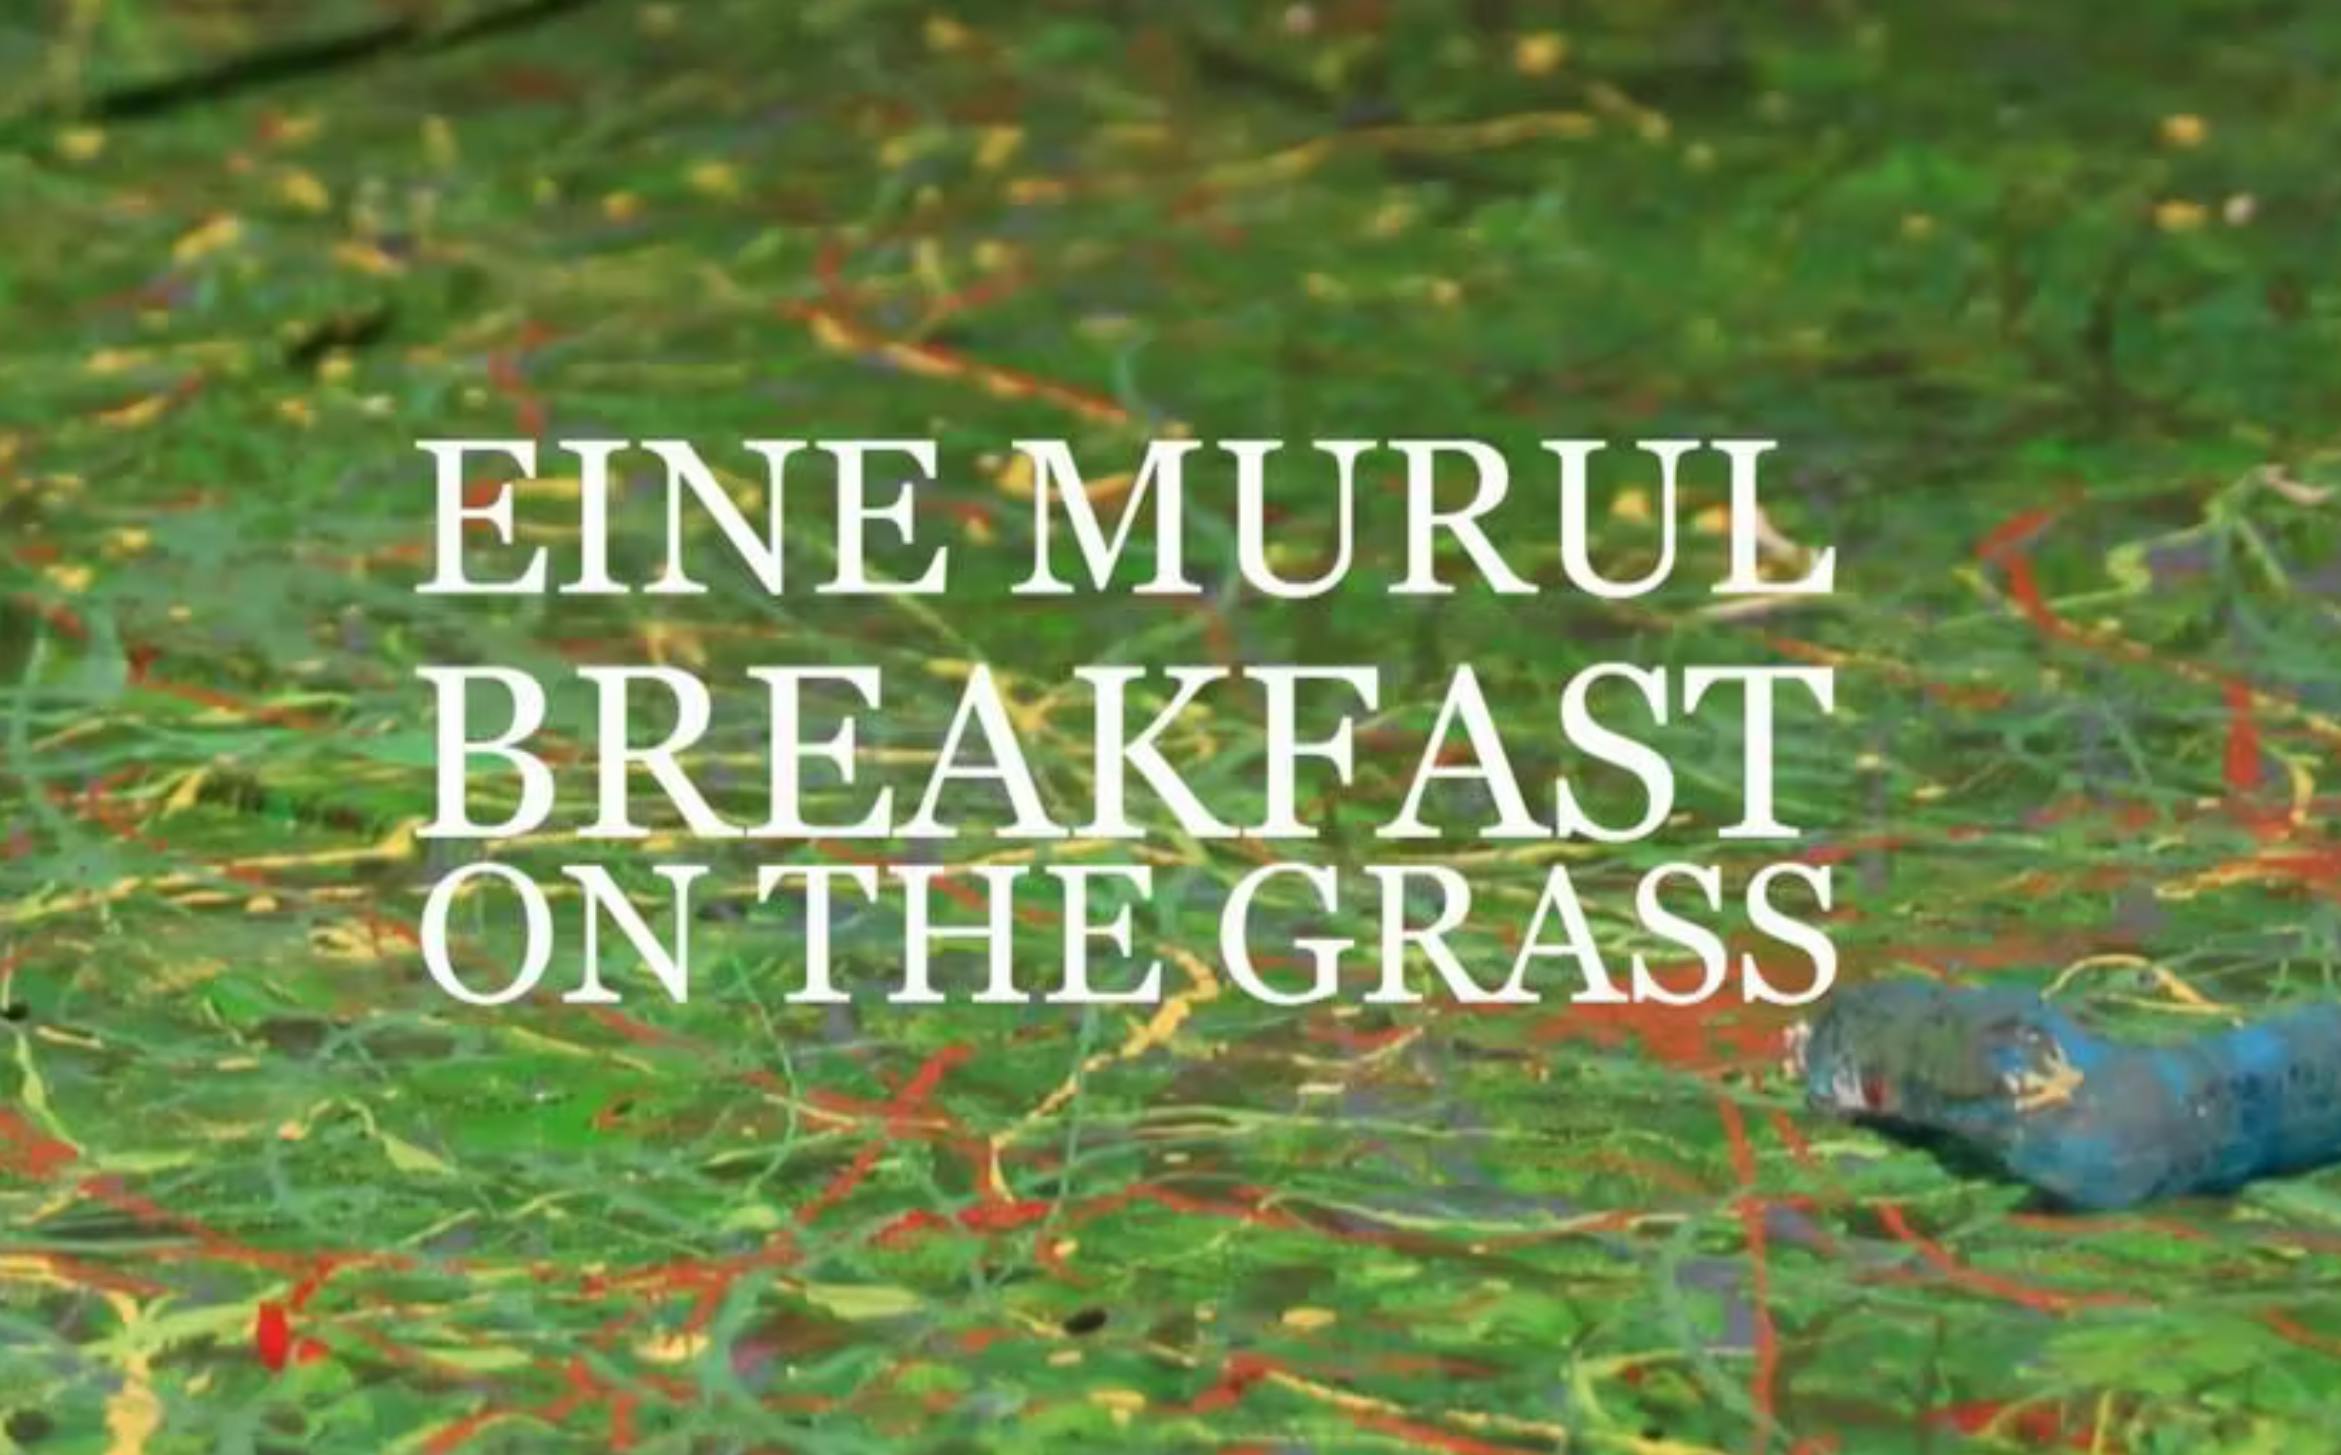 background of mixed paint splotch colours of green, red, blue and yellow. White text reads "EINE MURUL BREAKFAST ON THE GRASS"